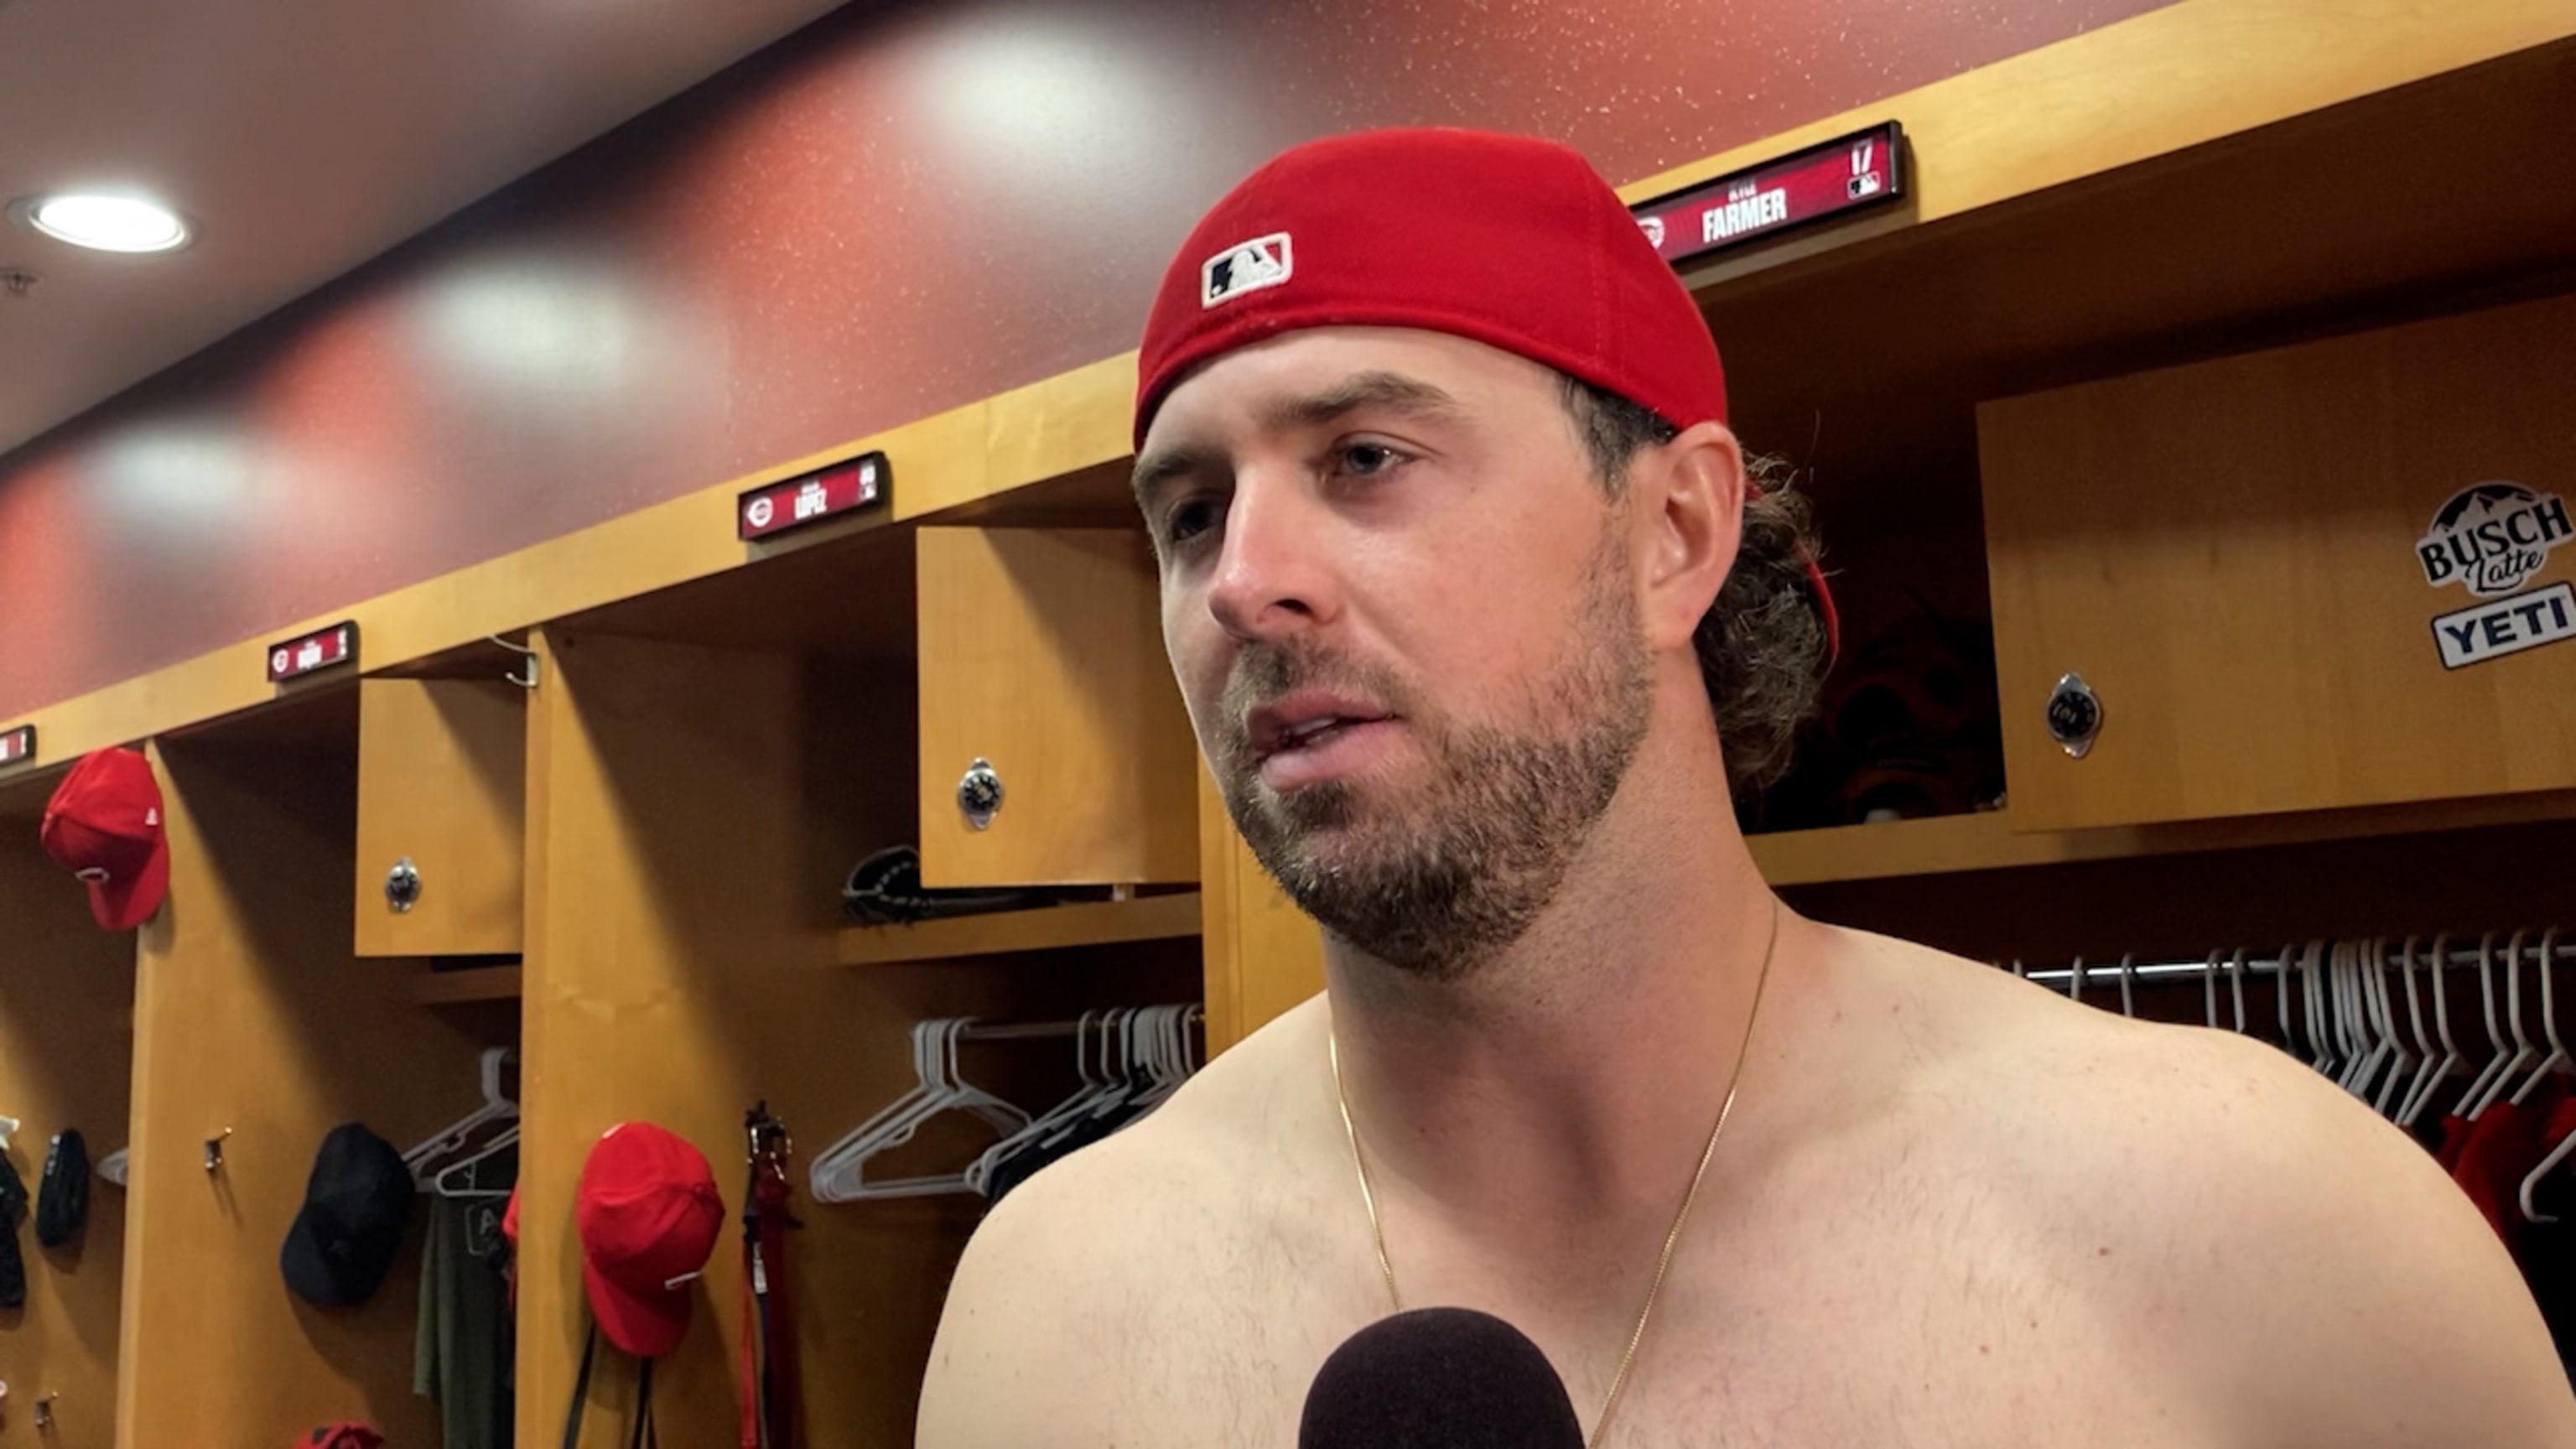 Kyle Farmer two homers, four hits, five RBIs, Reds score 20 runs